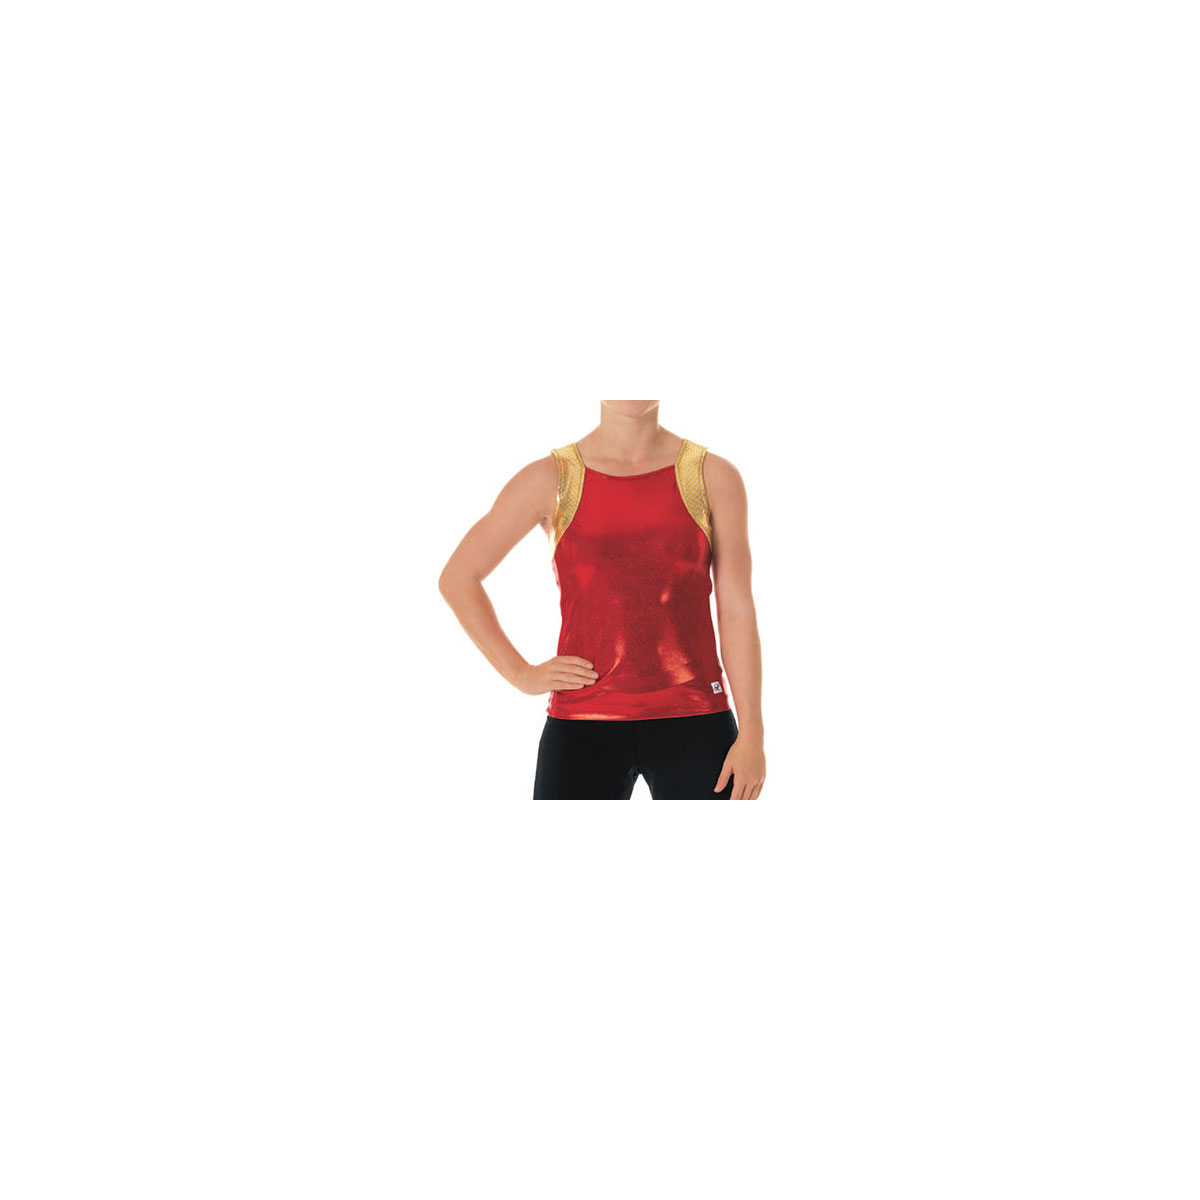 CC Dancewear Round Neck Specialty Material Top with Open Back